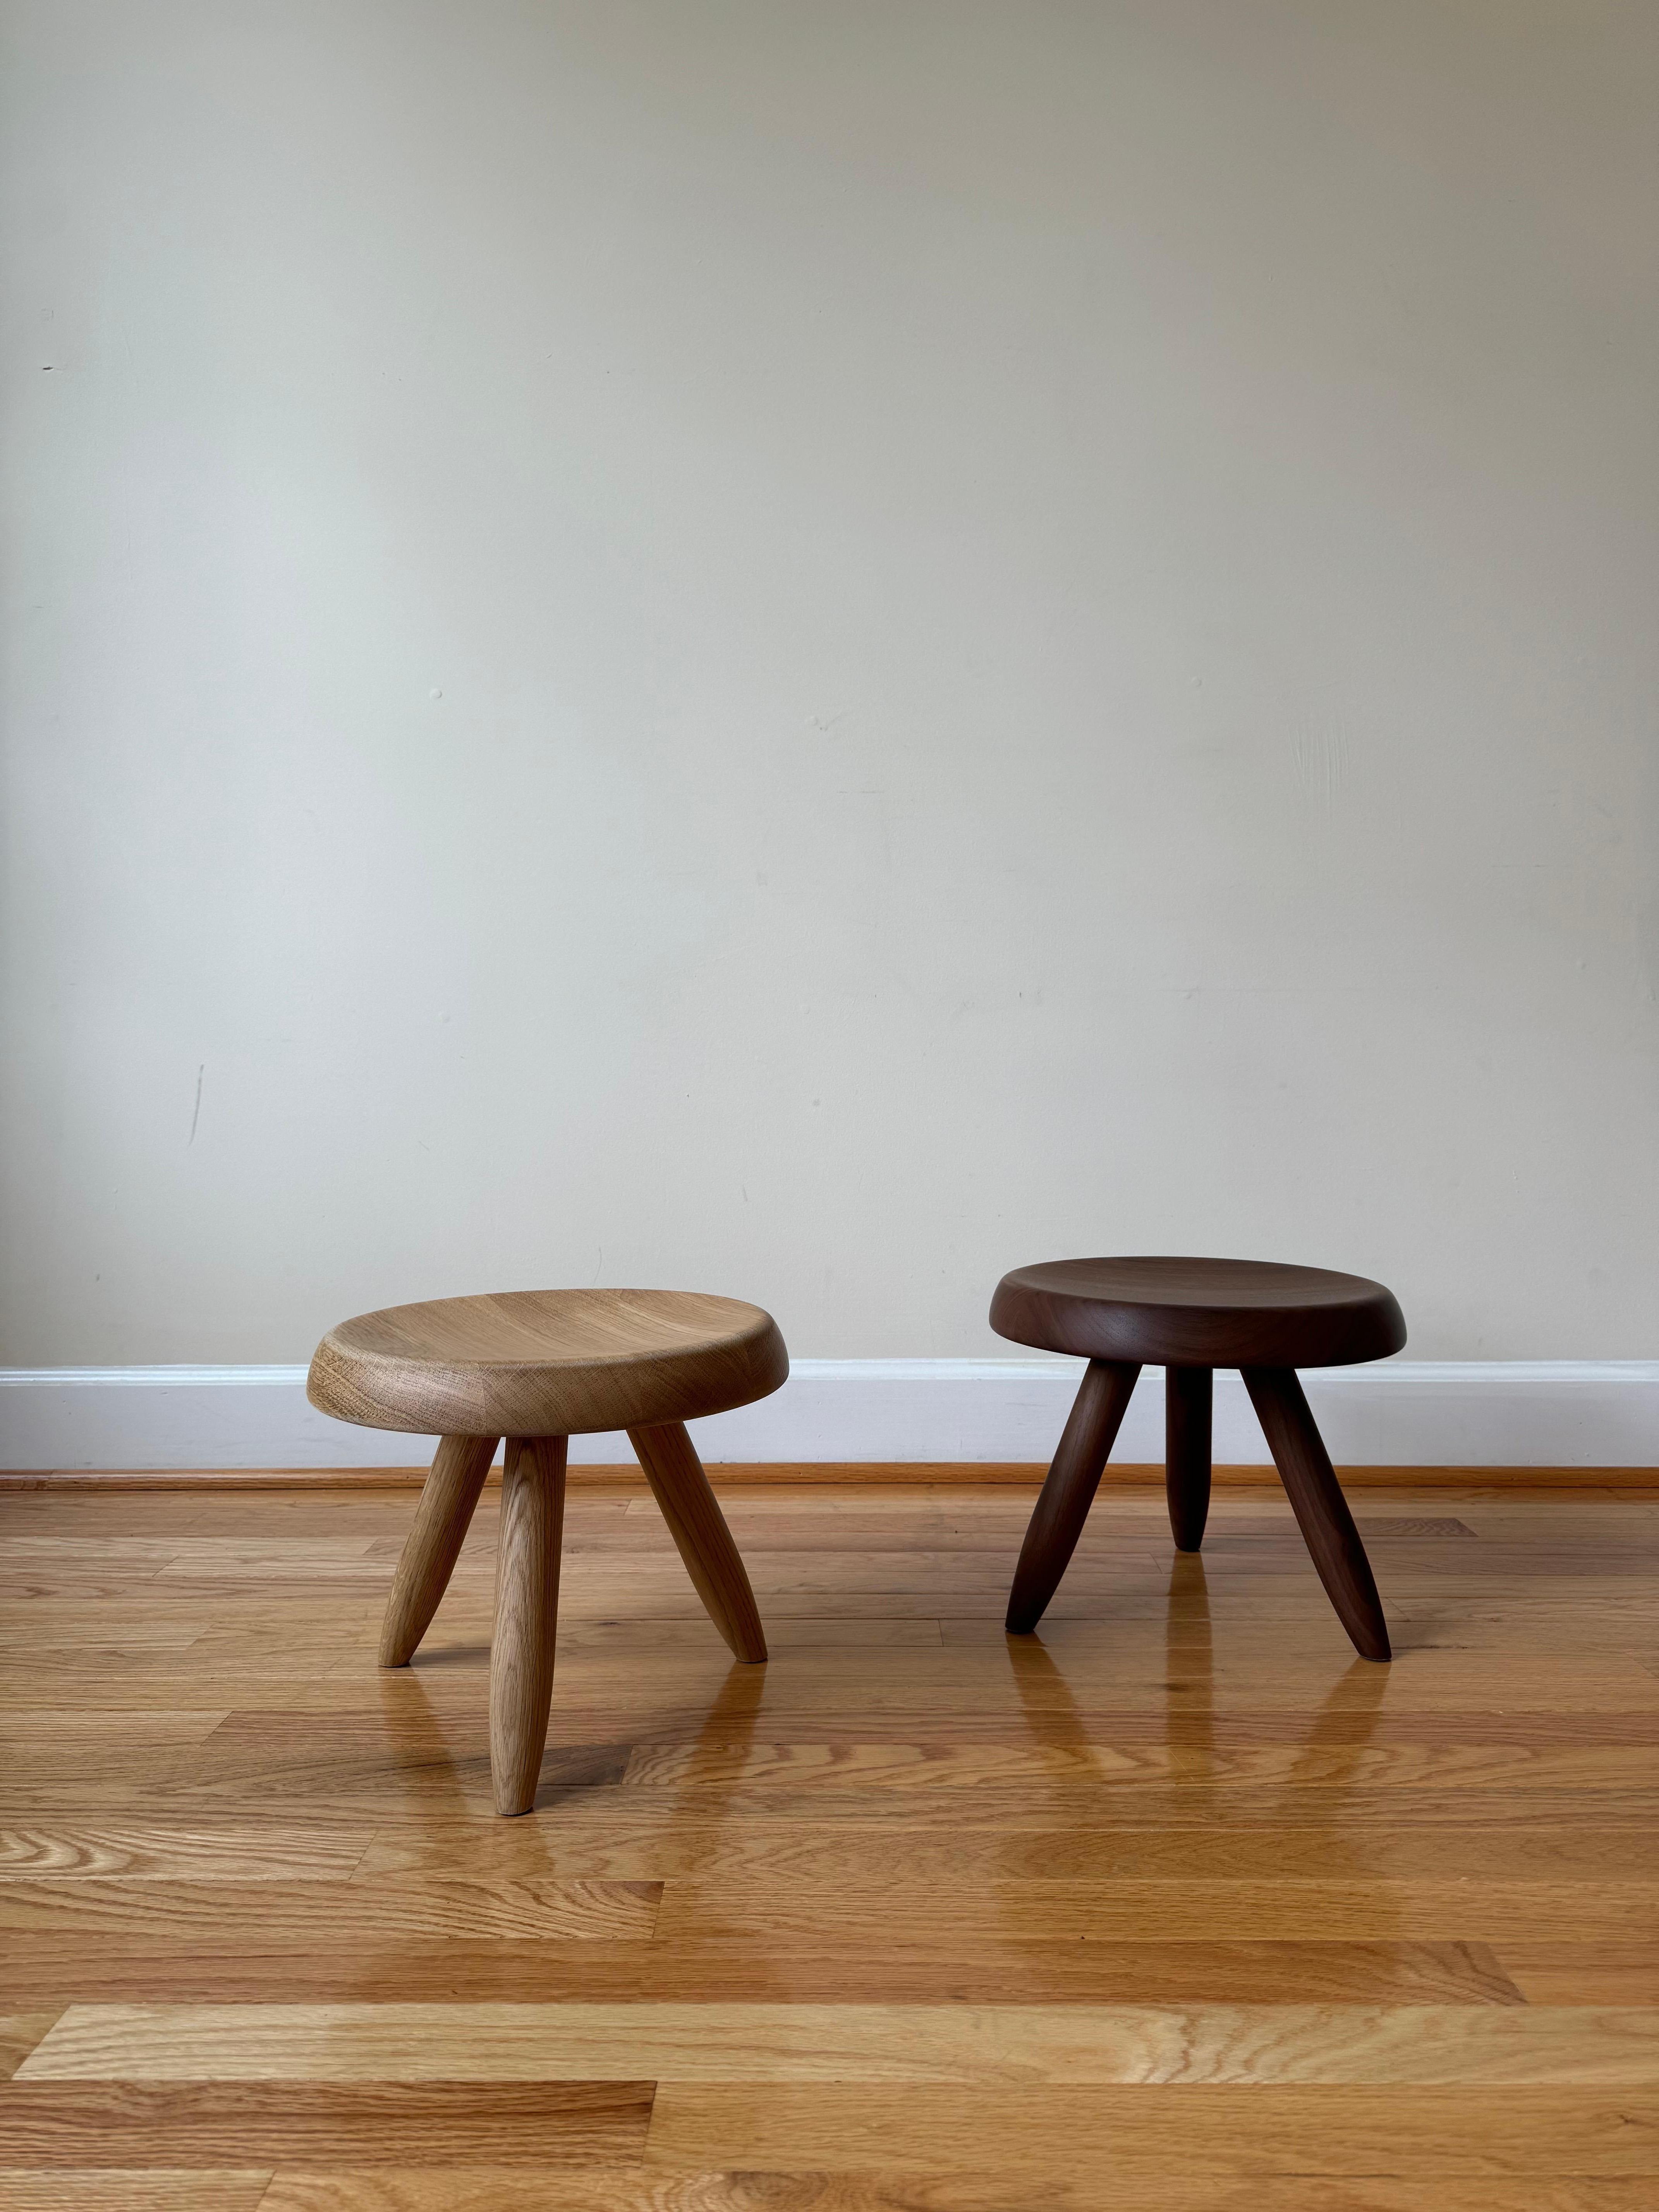 Tabouret Berger (Berger Stool) by Charlotte Perriand for Cassina For Sale 7